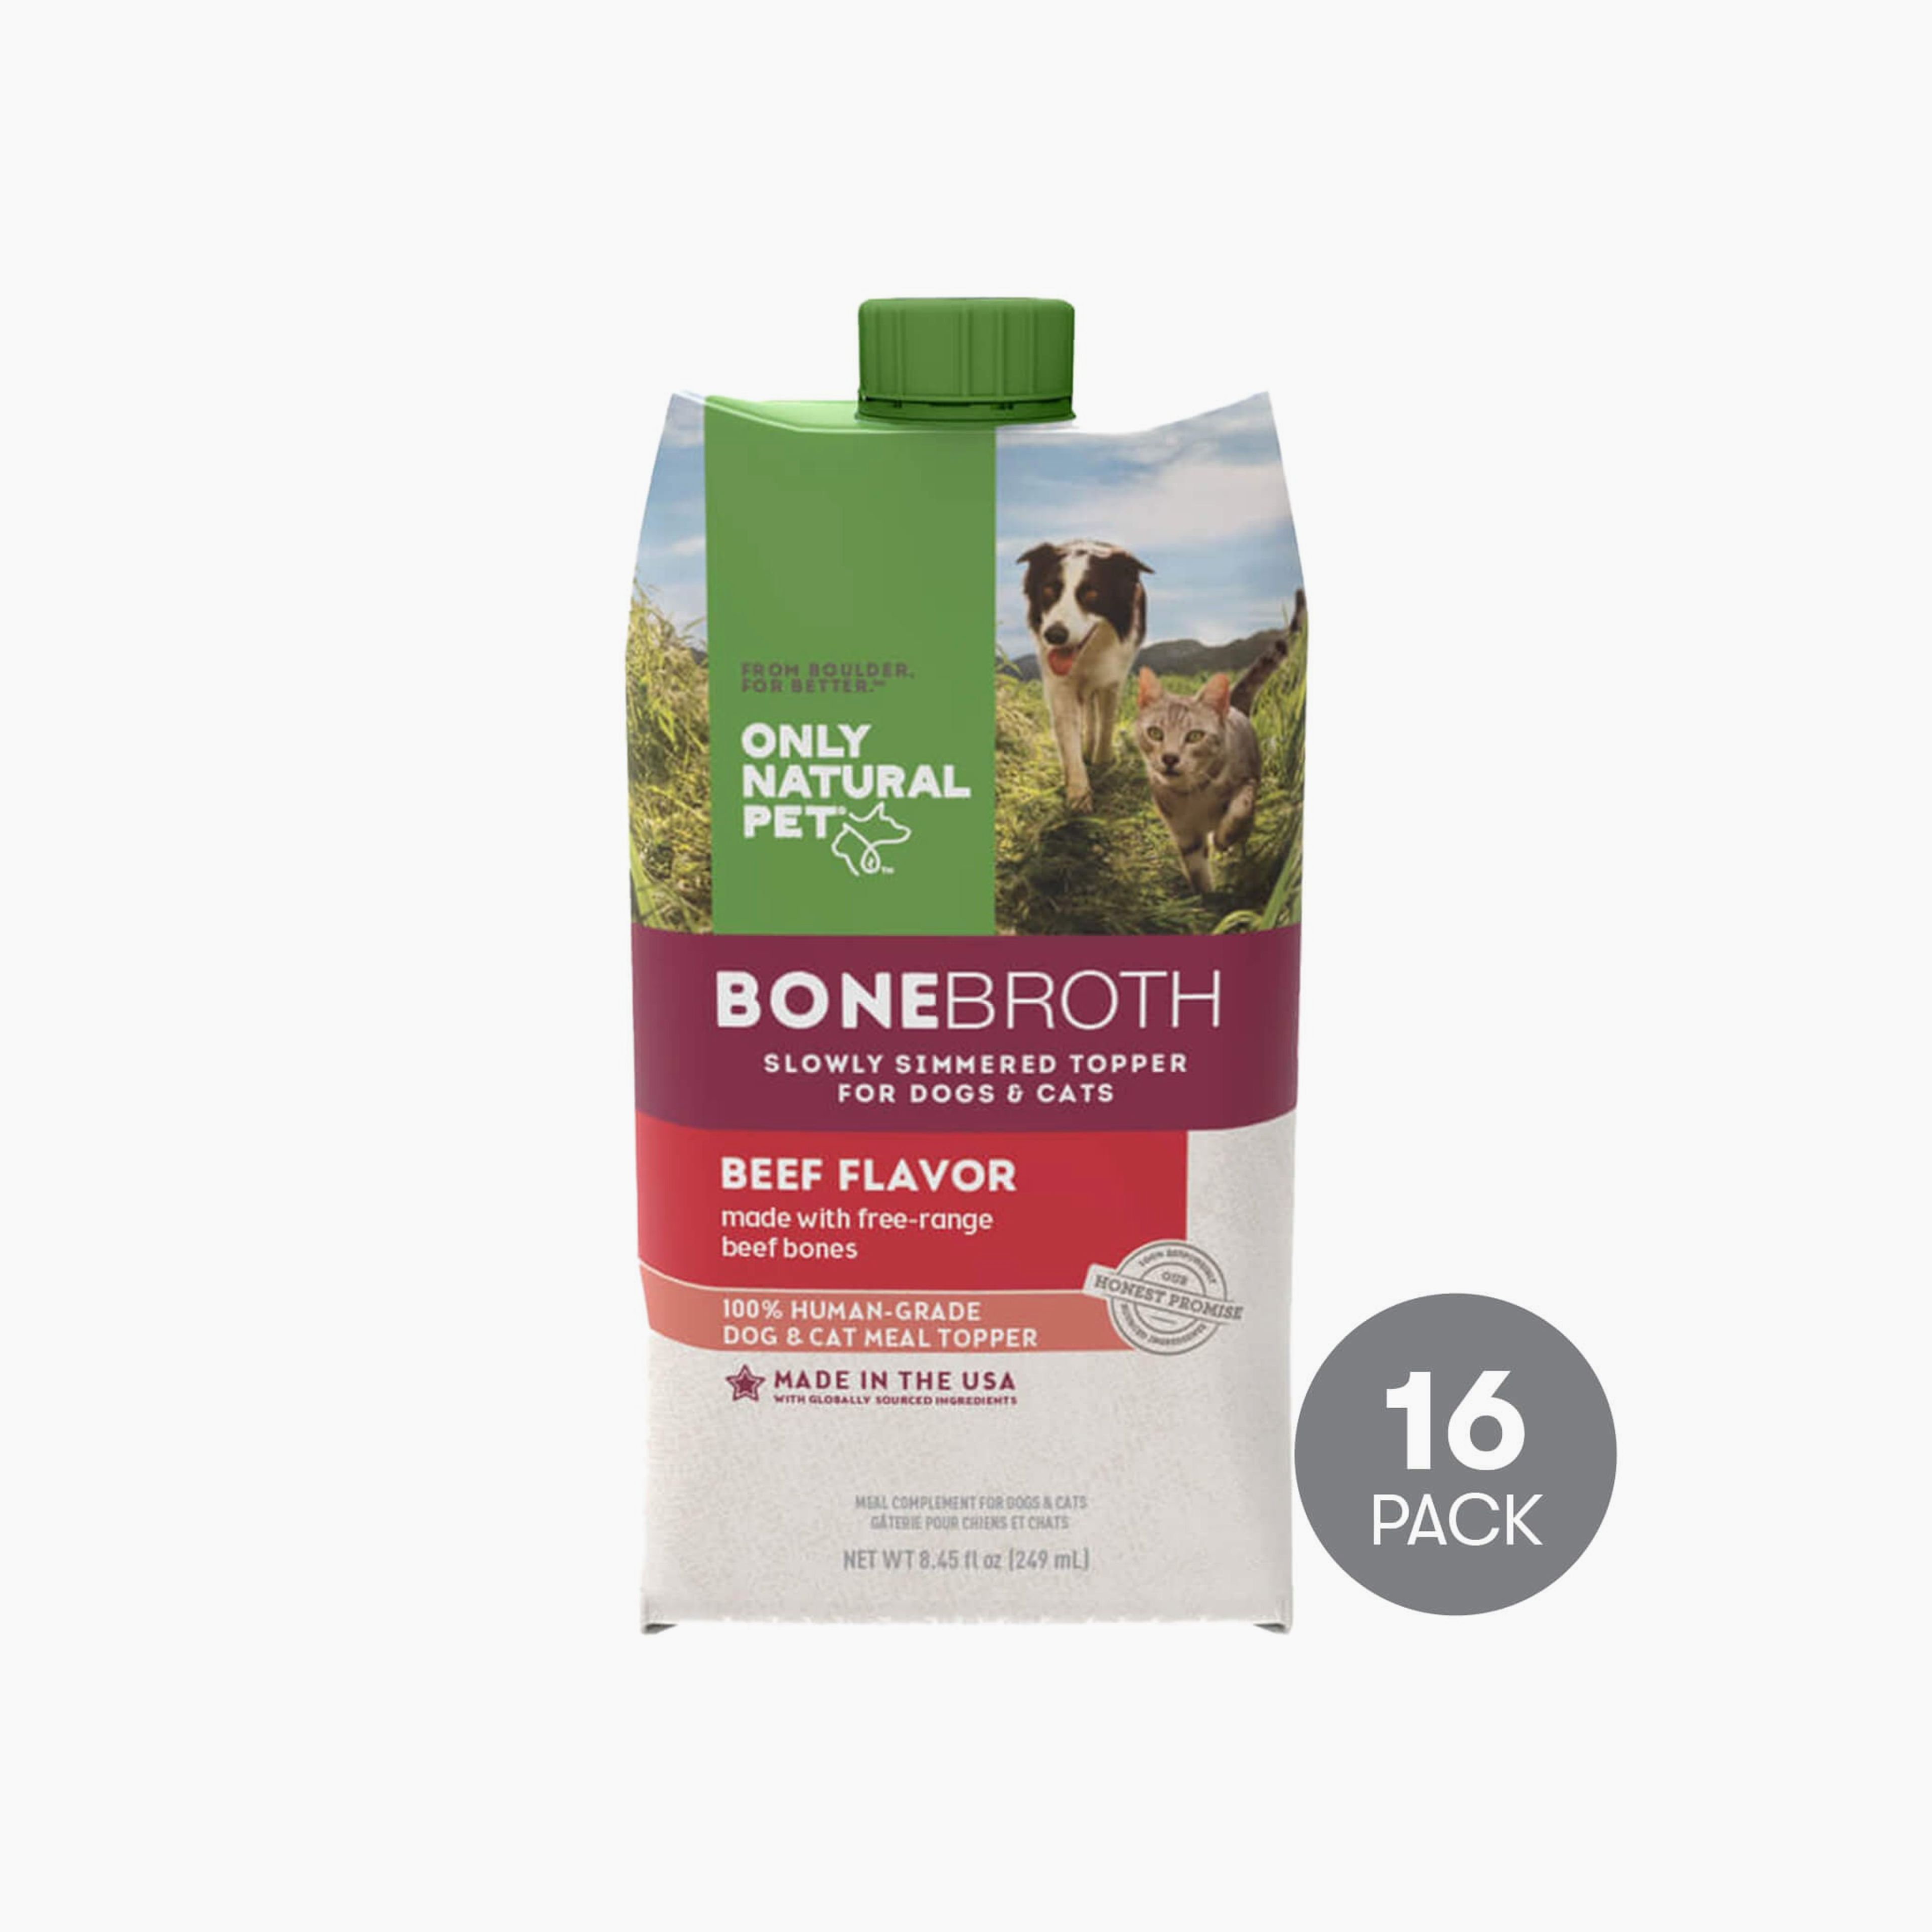 Only Natural Pet Bone Broth Beef Flavor Dog & Cat Meal Topper